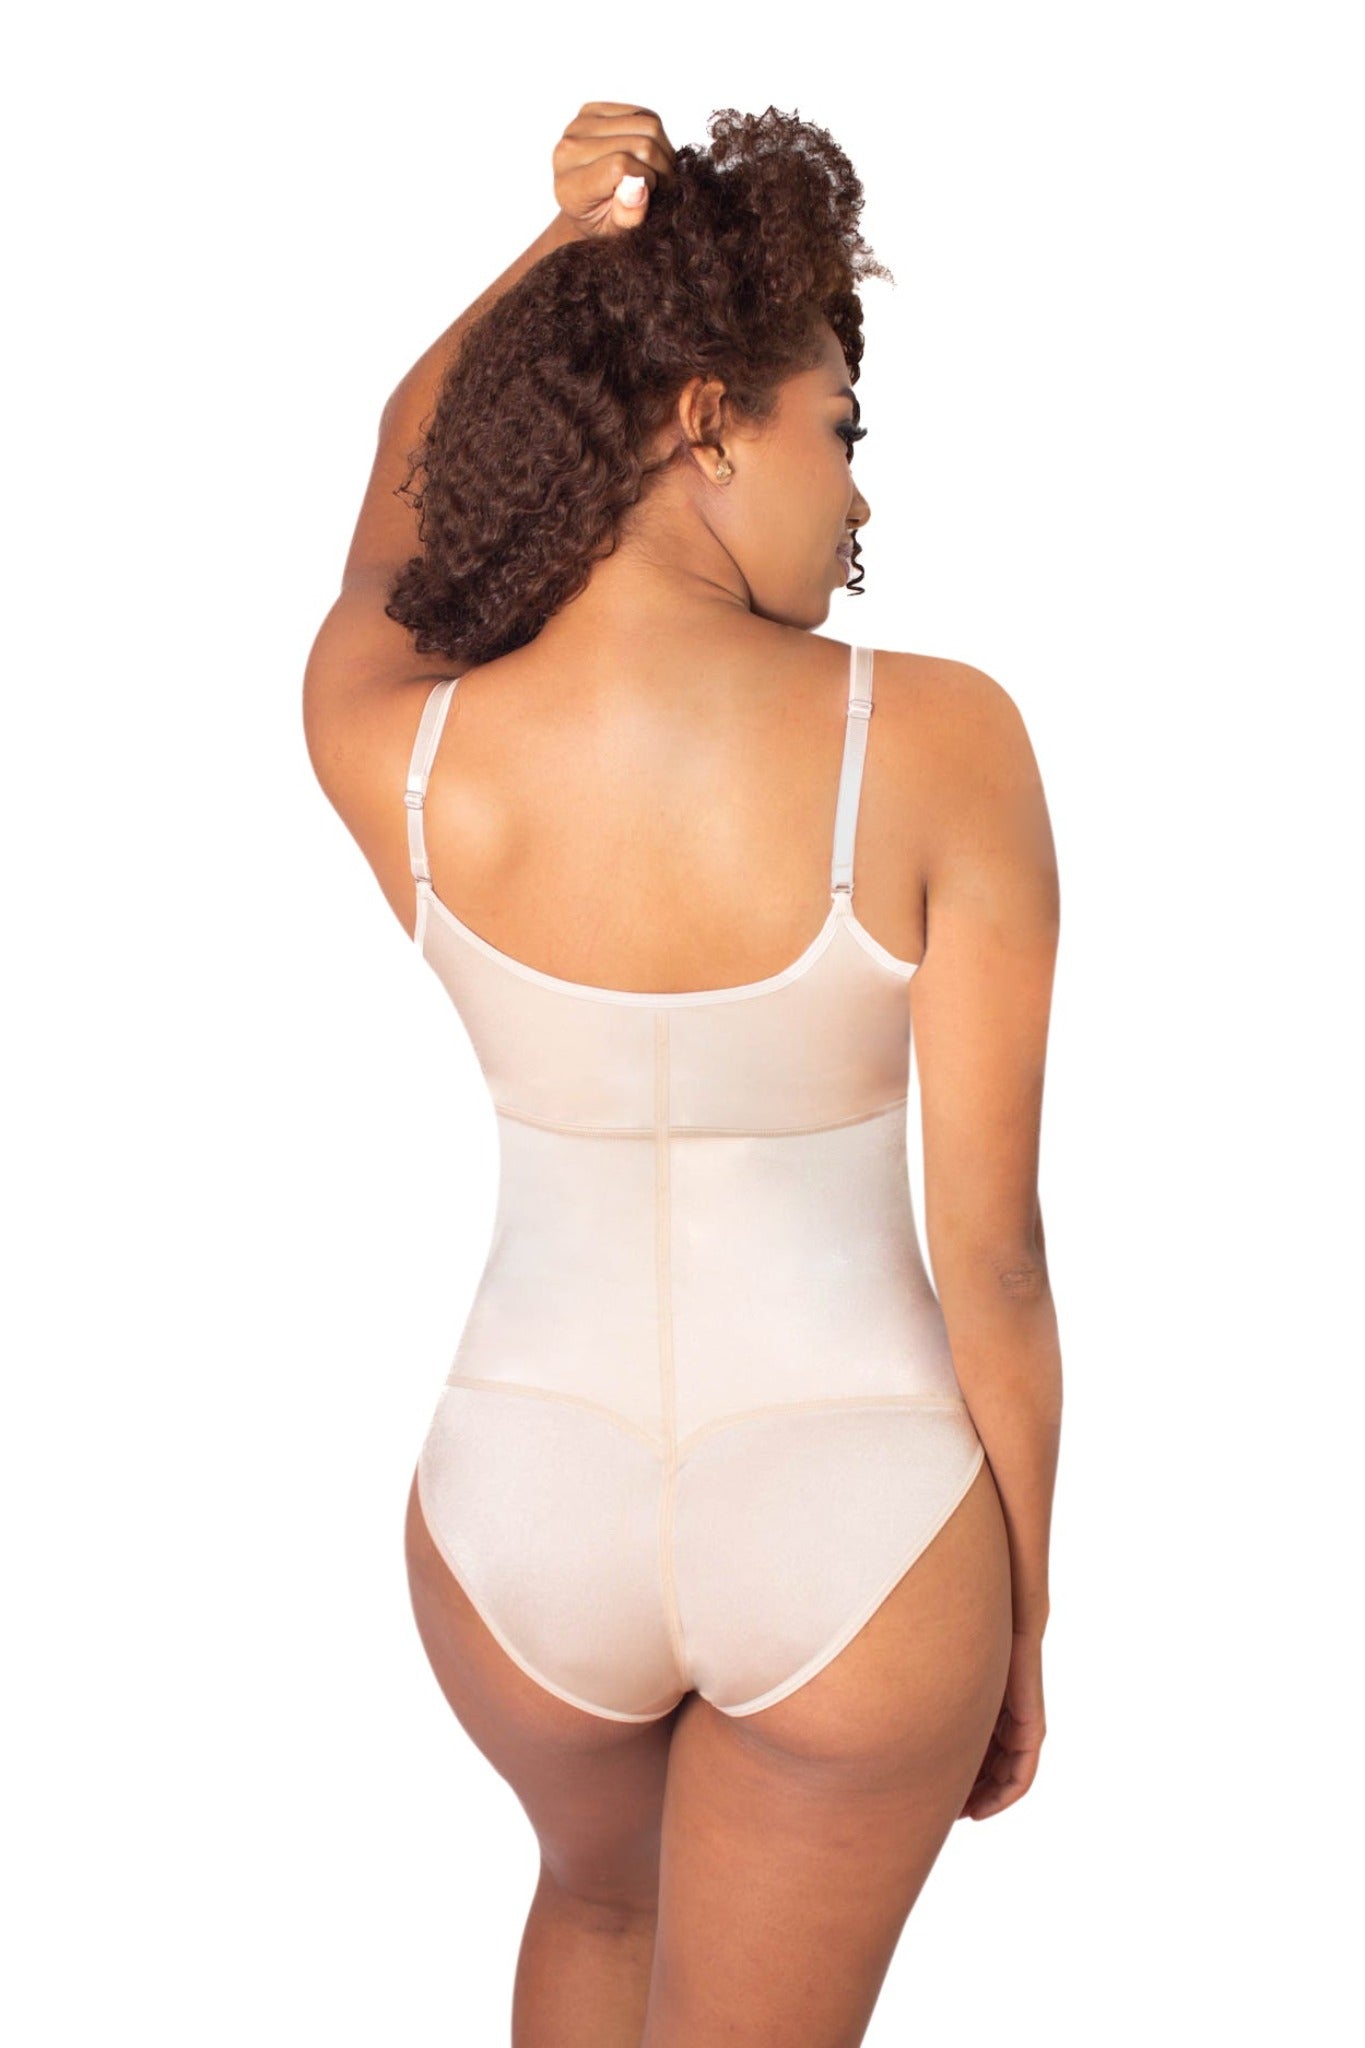 Vedette 170 Extra Firm Control Body Shaper